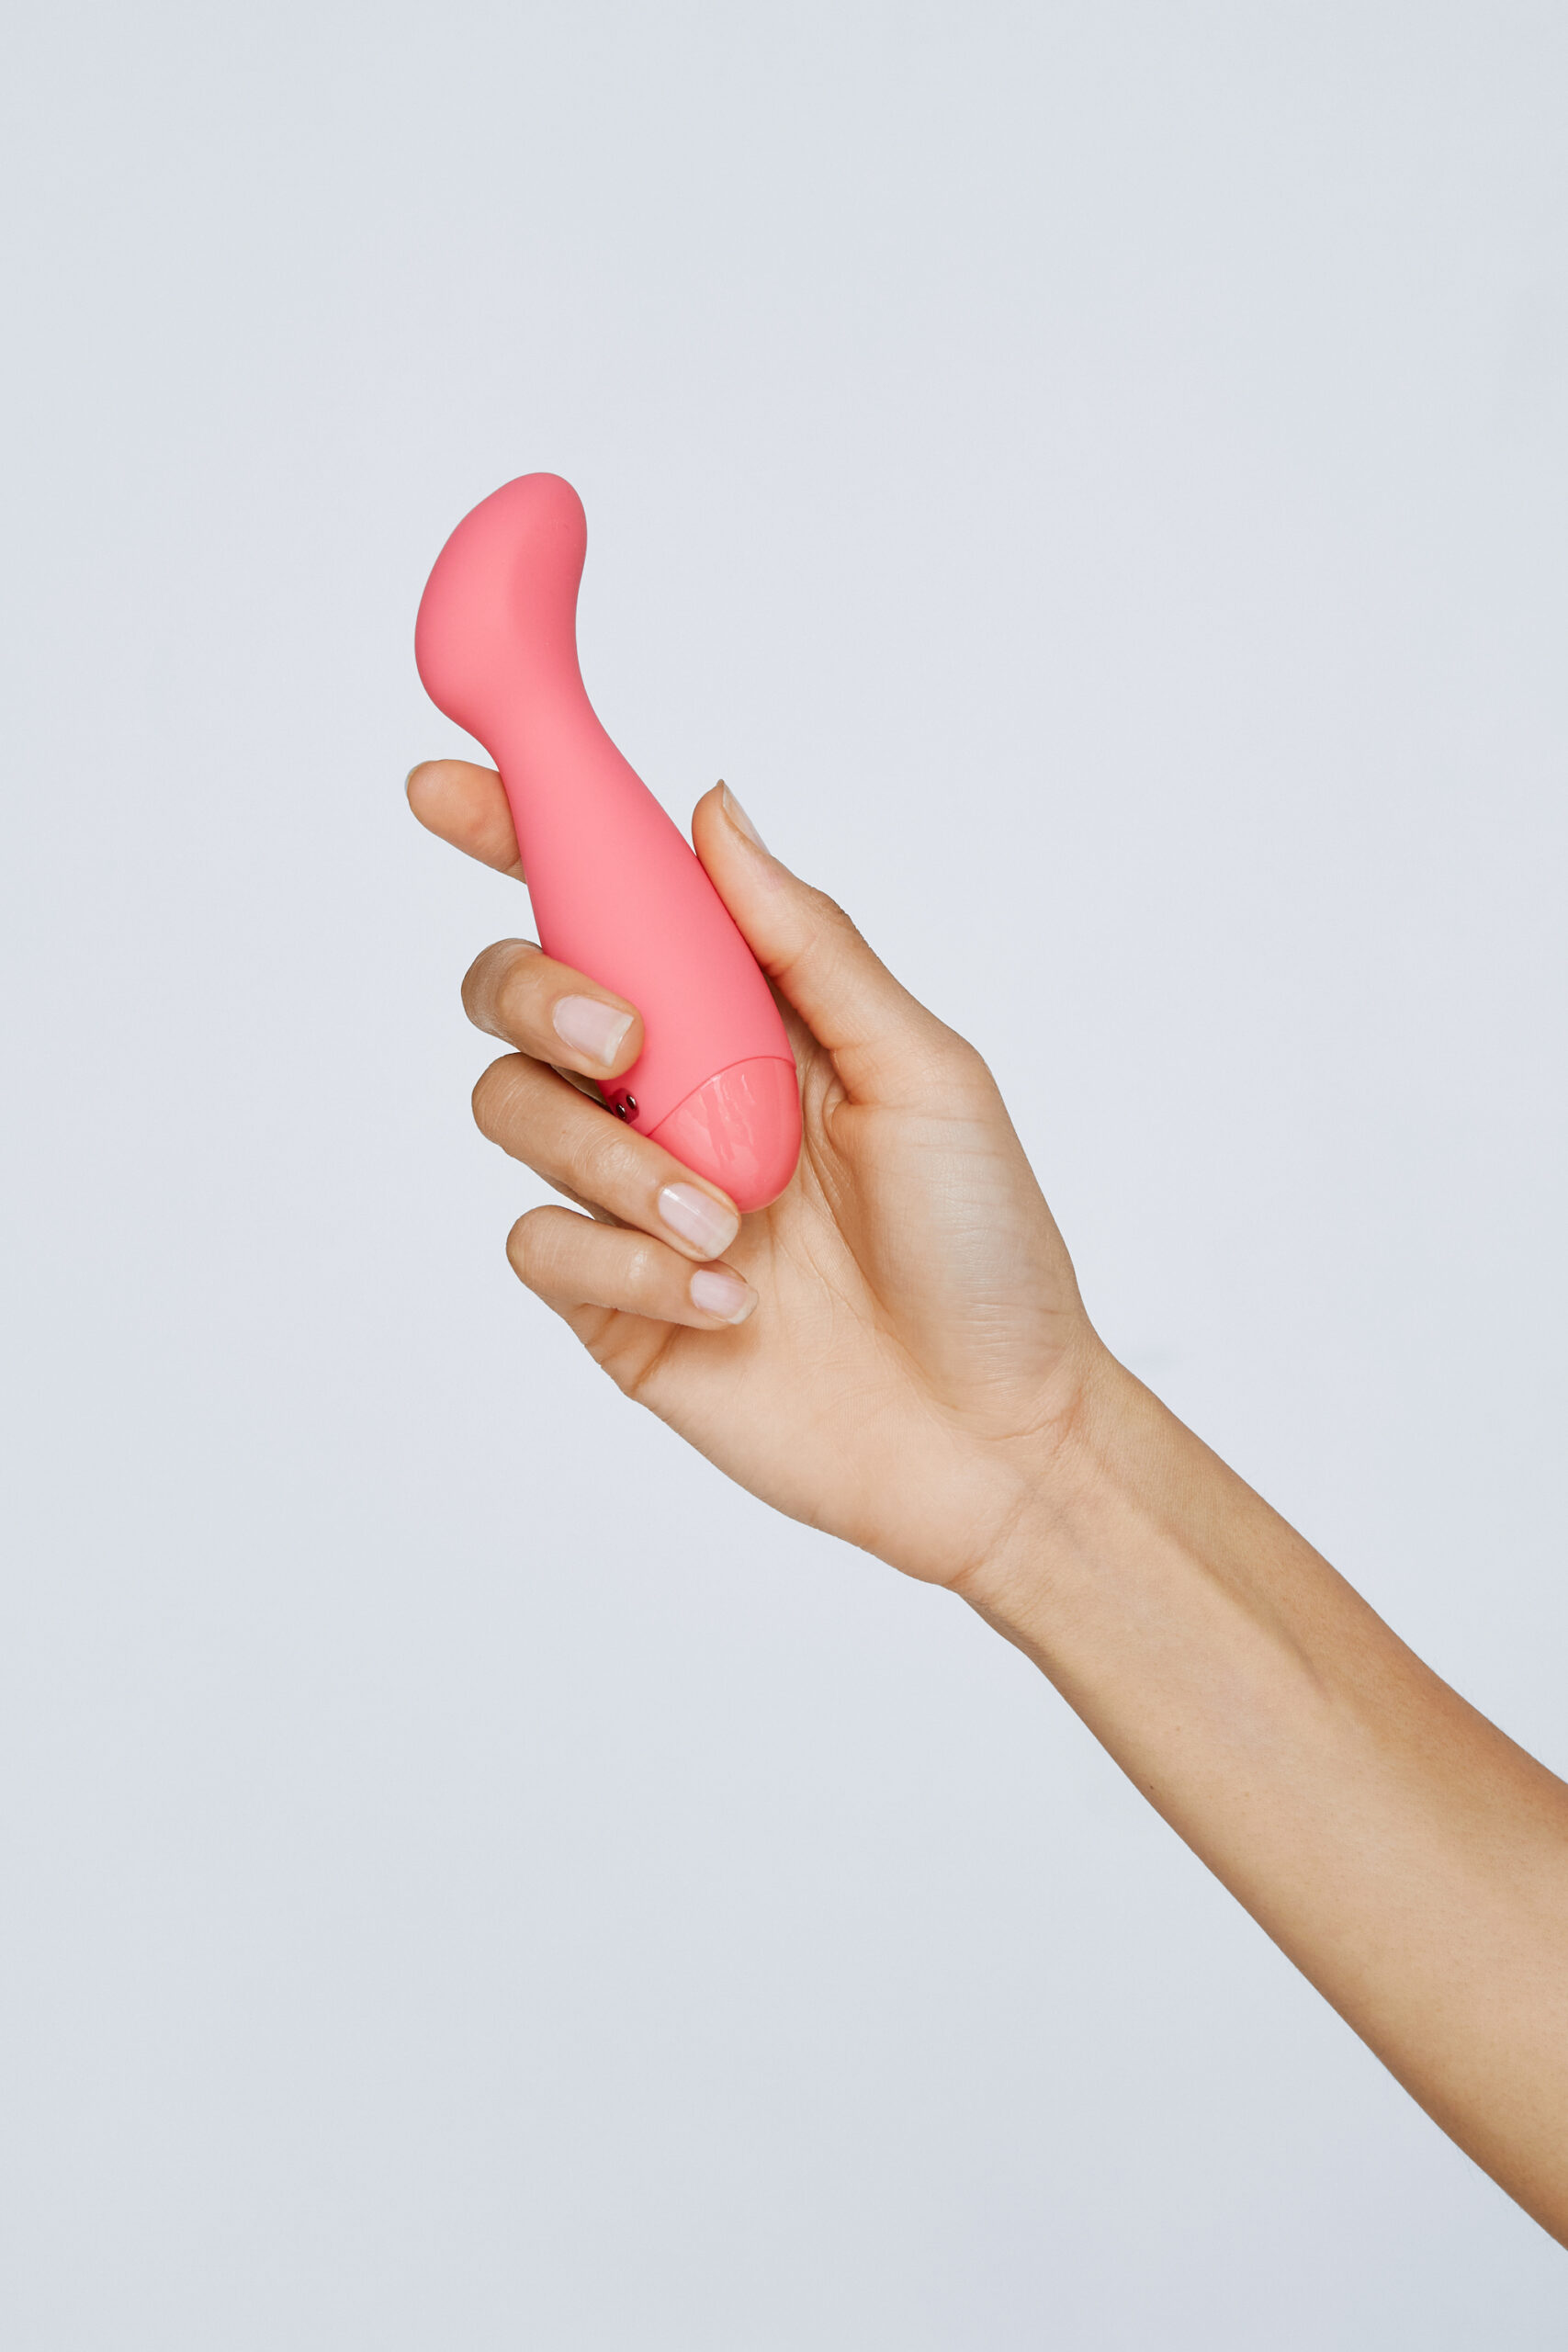 10 Function Rechargeable G-Spot Wand Vibrator Sex Toy